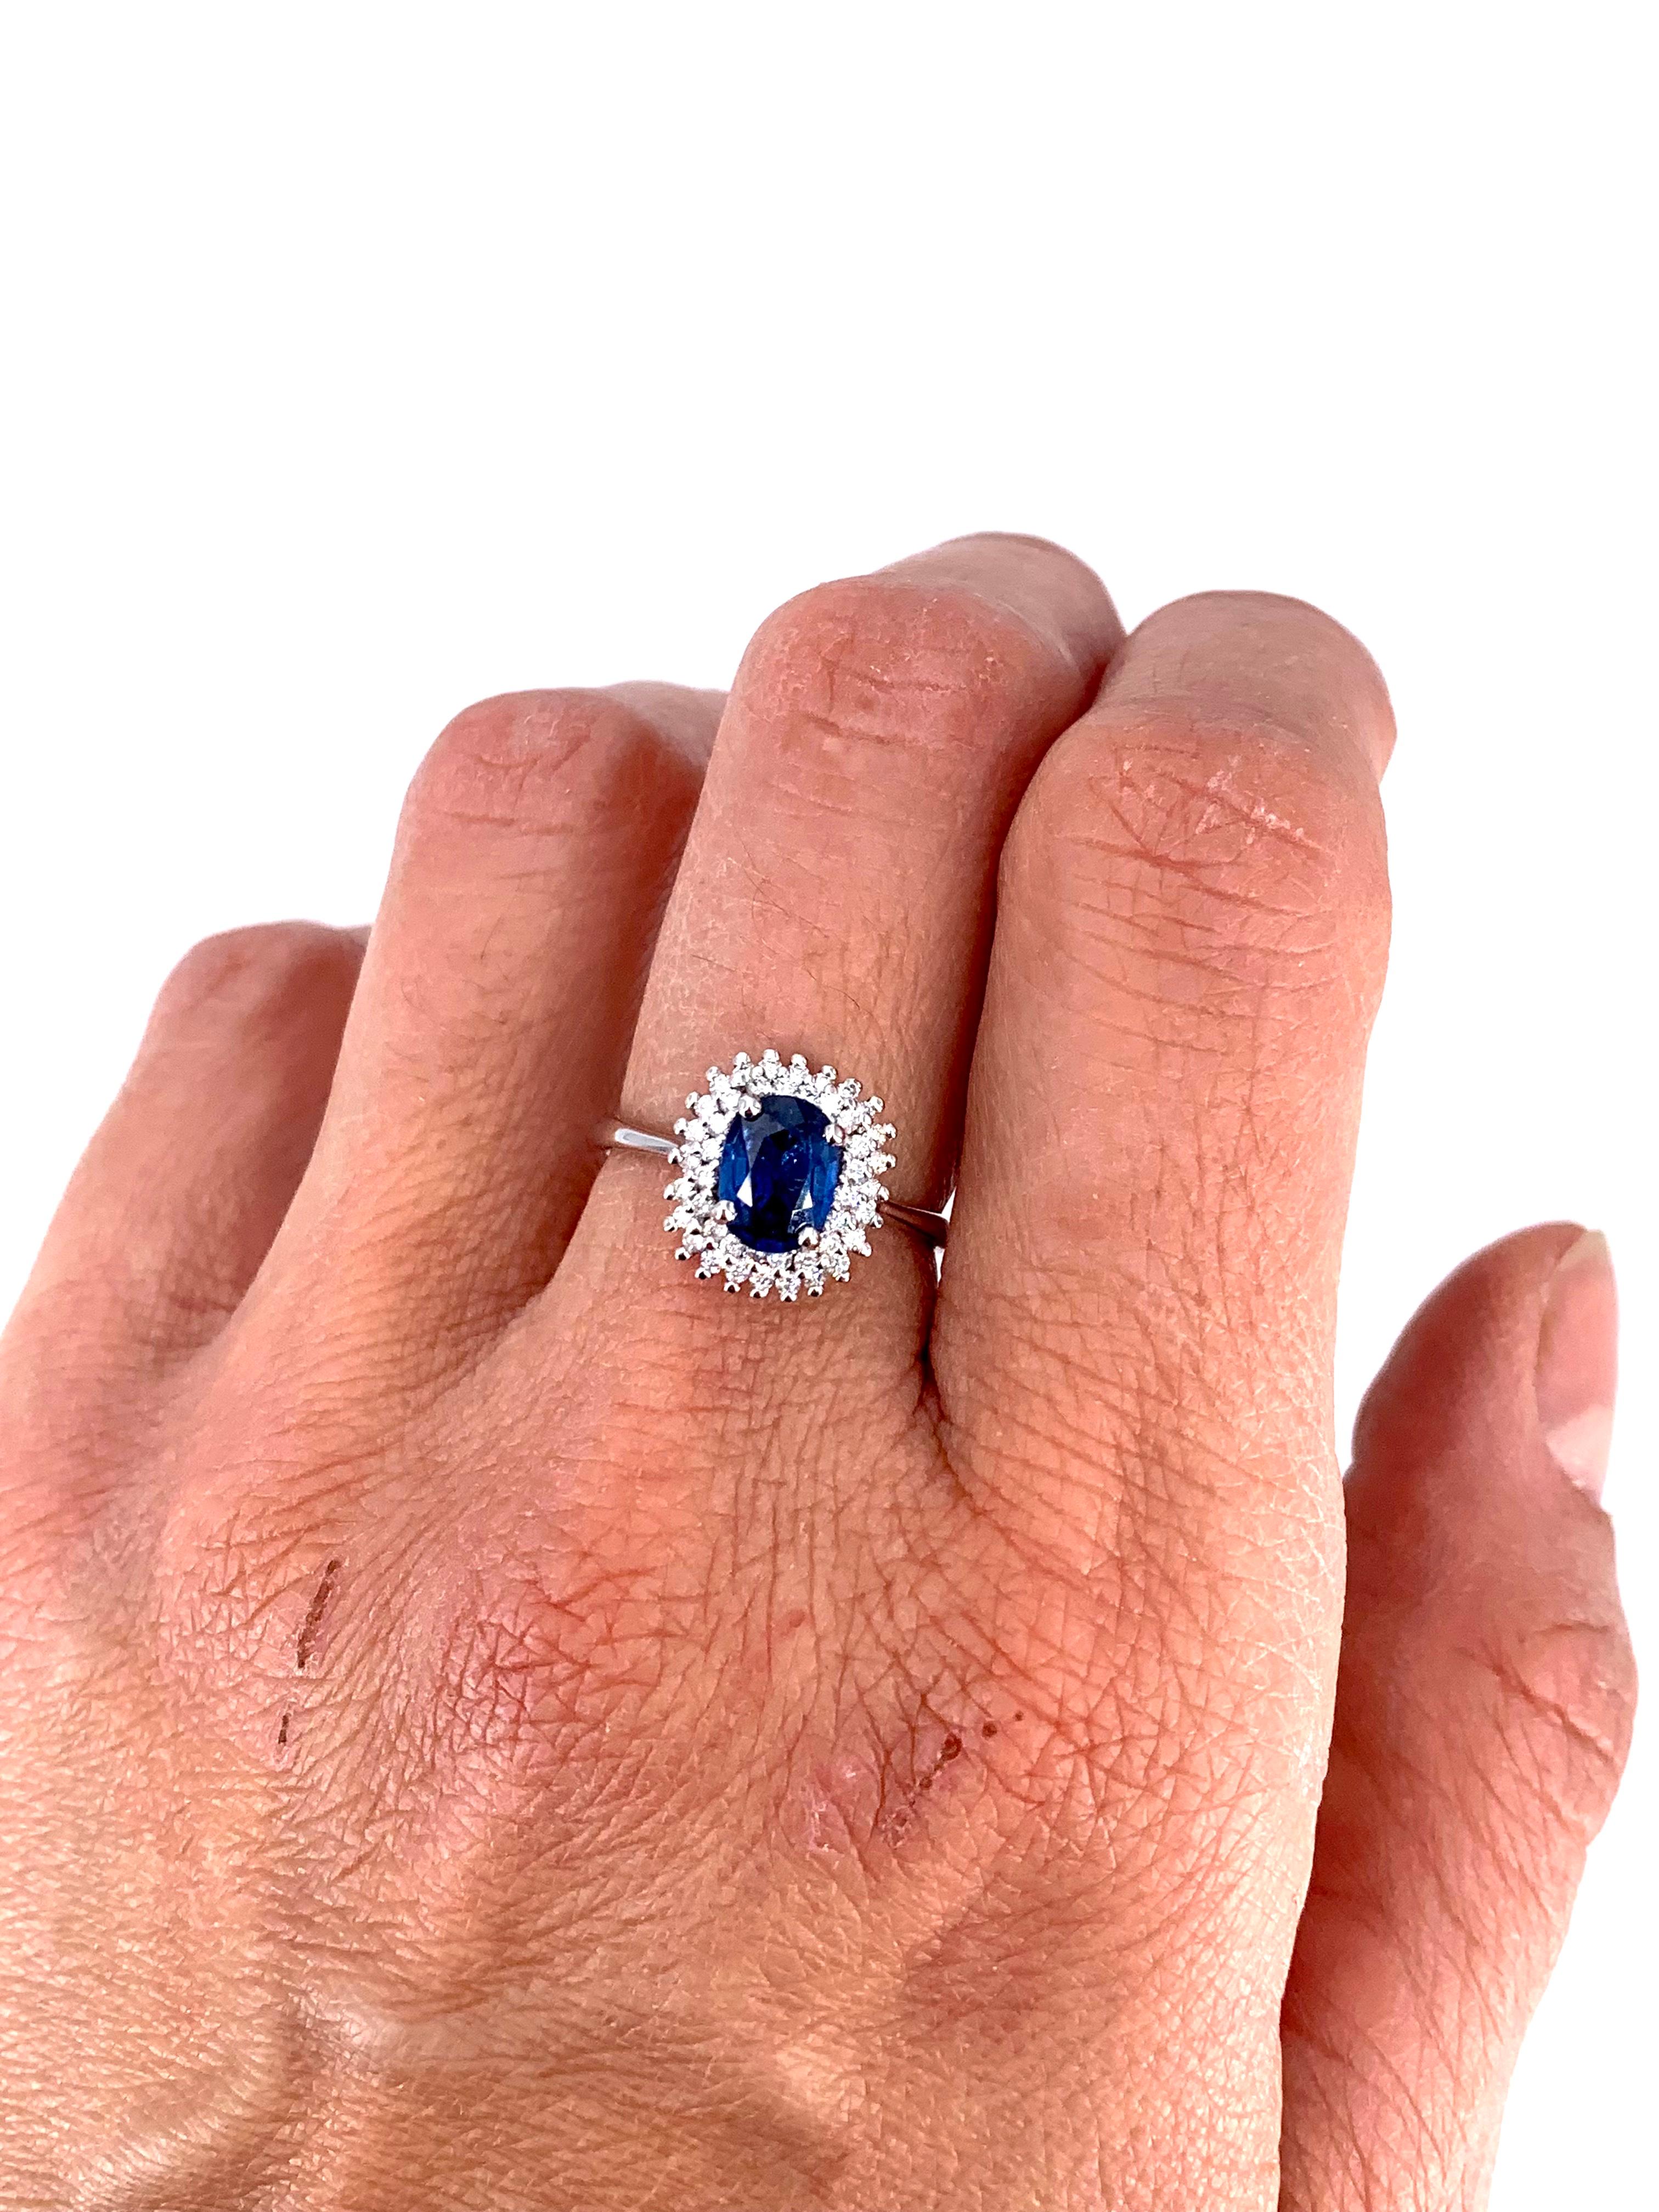 Contemporary Double Halo 1.12 Carat Sapphire & 0.34 Carat Diamond Cocktail Ring For Sale 4